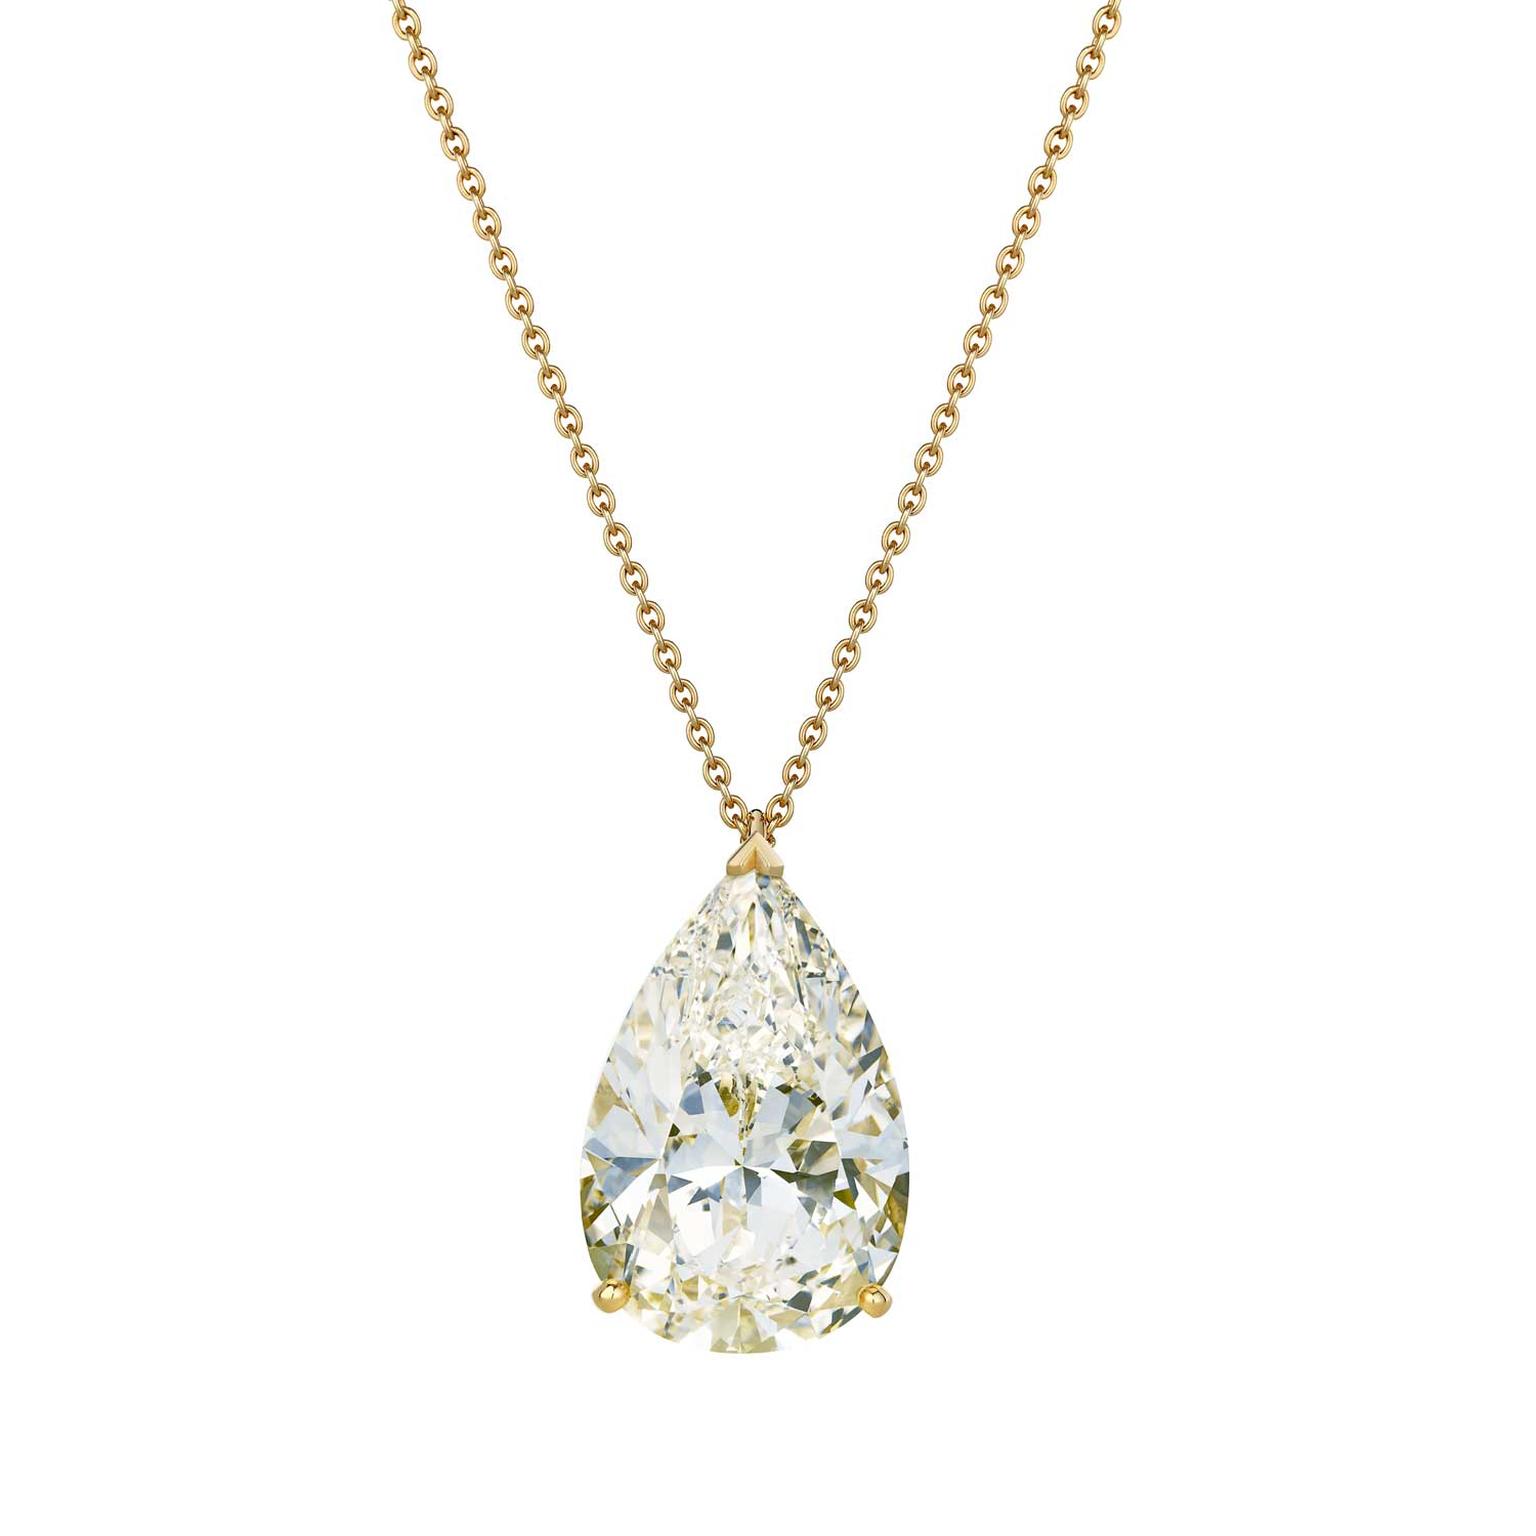 Classic De Beers yellow gold pendant with a pear-shaped 24.71 carat M colour white diamond